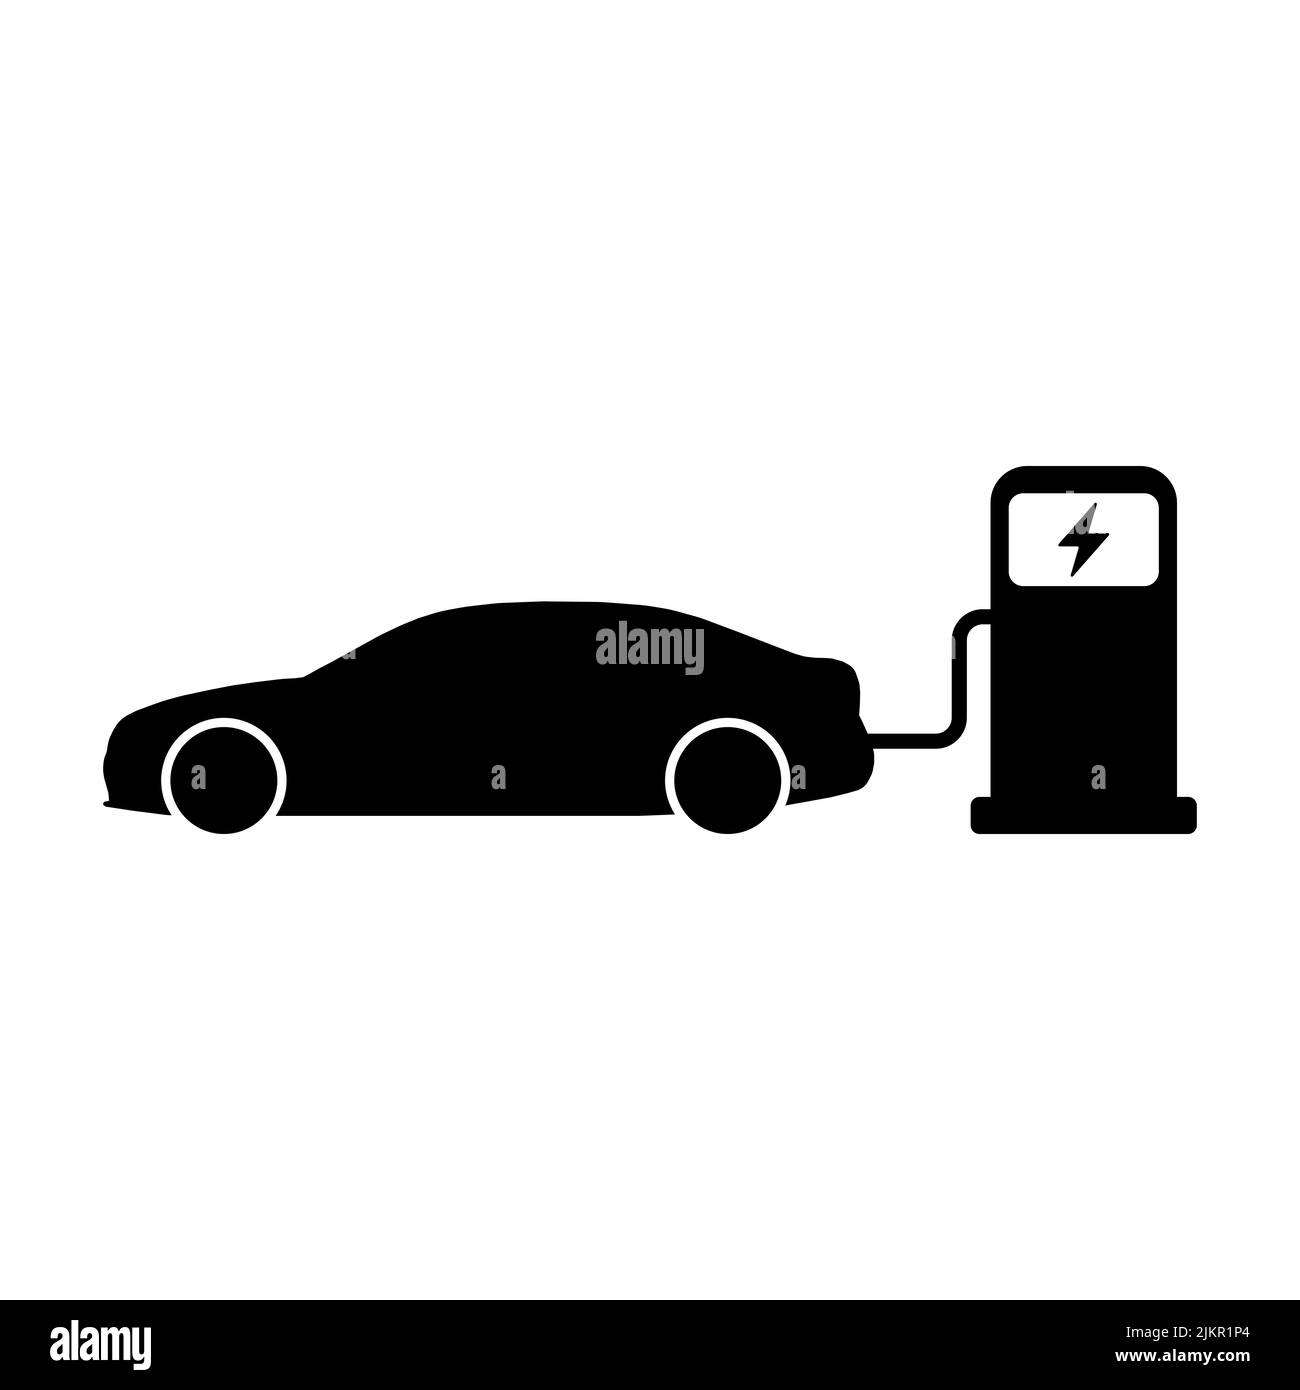 EV charging vector icon on white background Stock Vector